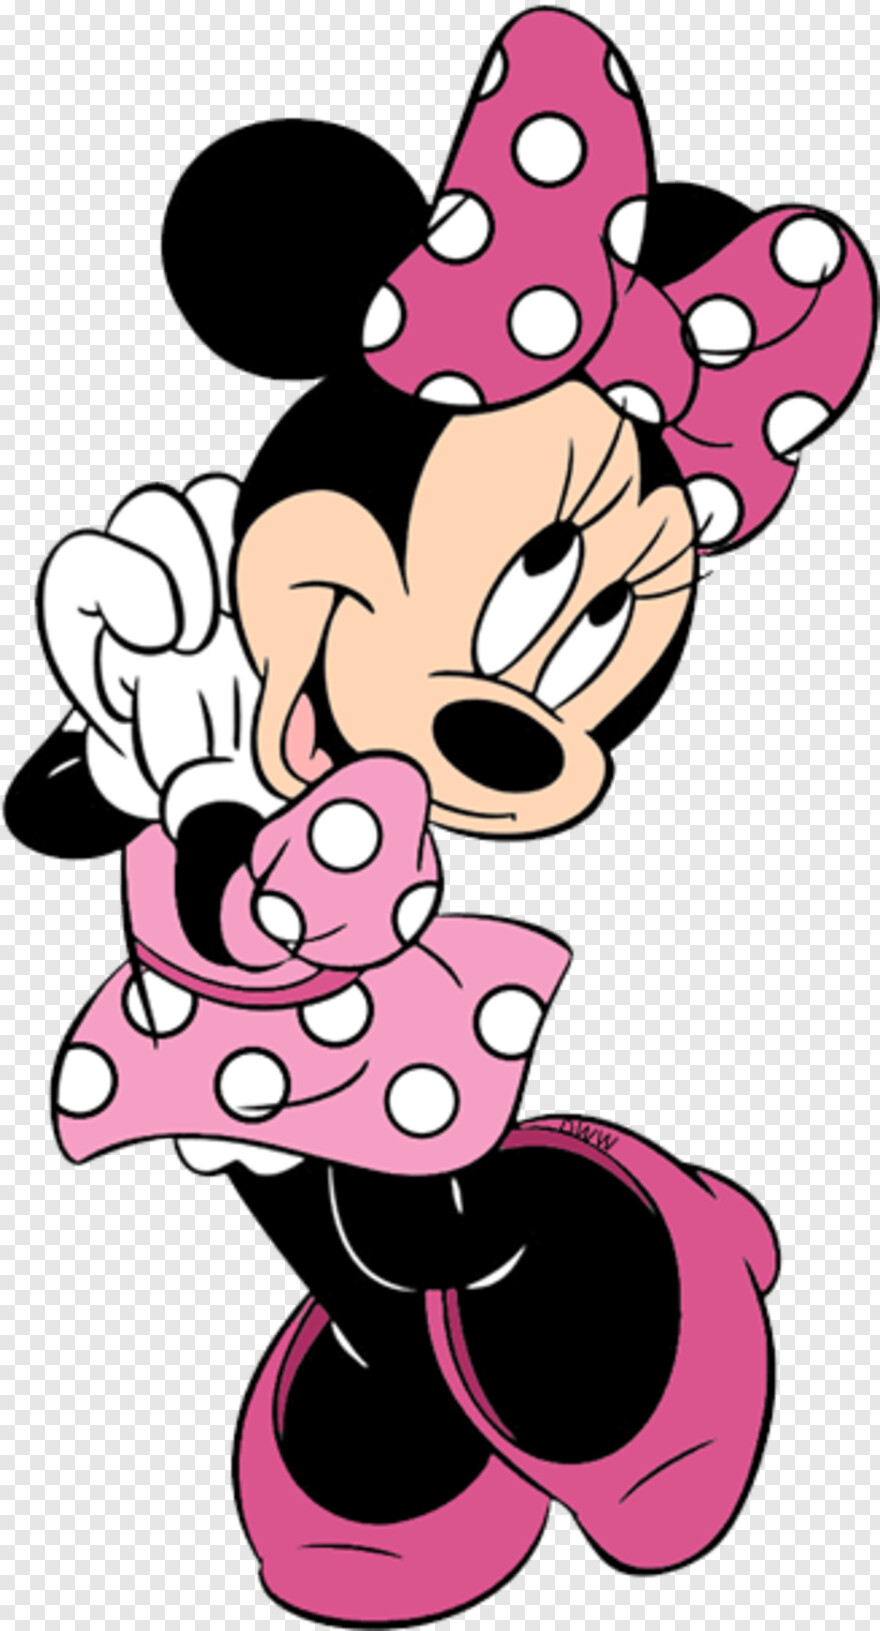 minnie-mouse # 480028